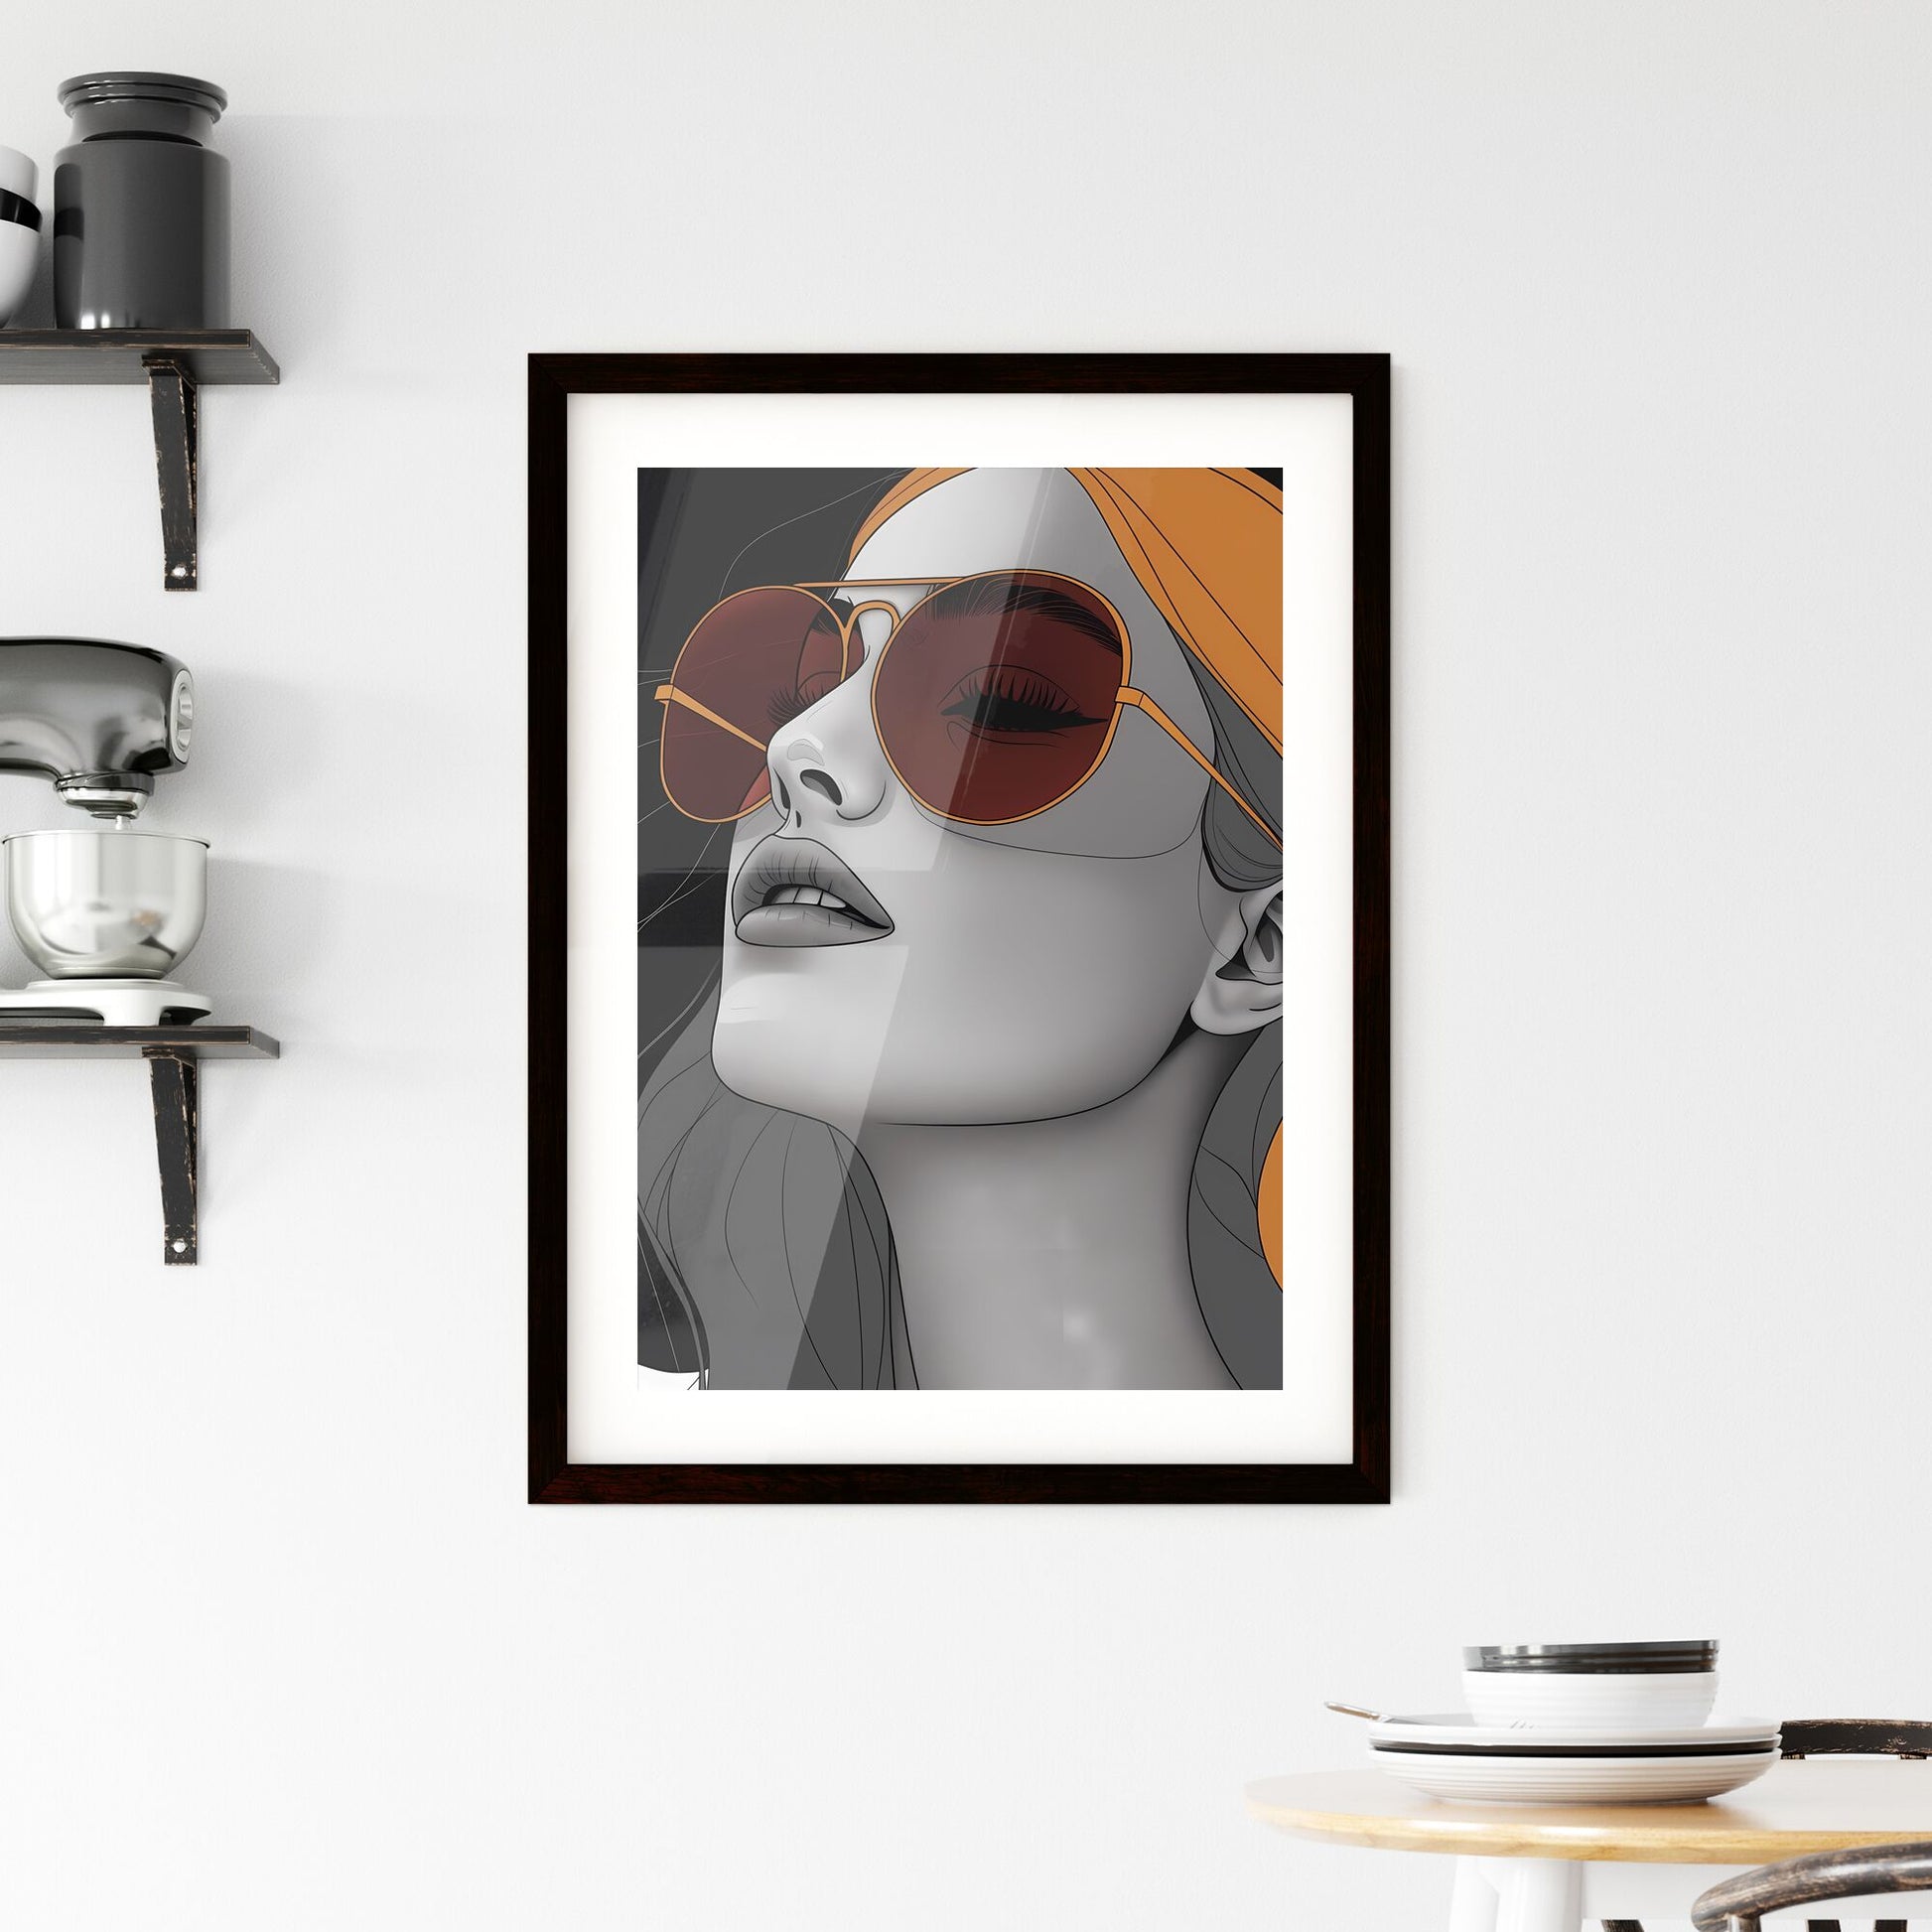 Abstract Line Art Poster: 60s Girl with Sunglasses, Minimalist Geometric Shapes Default Title